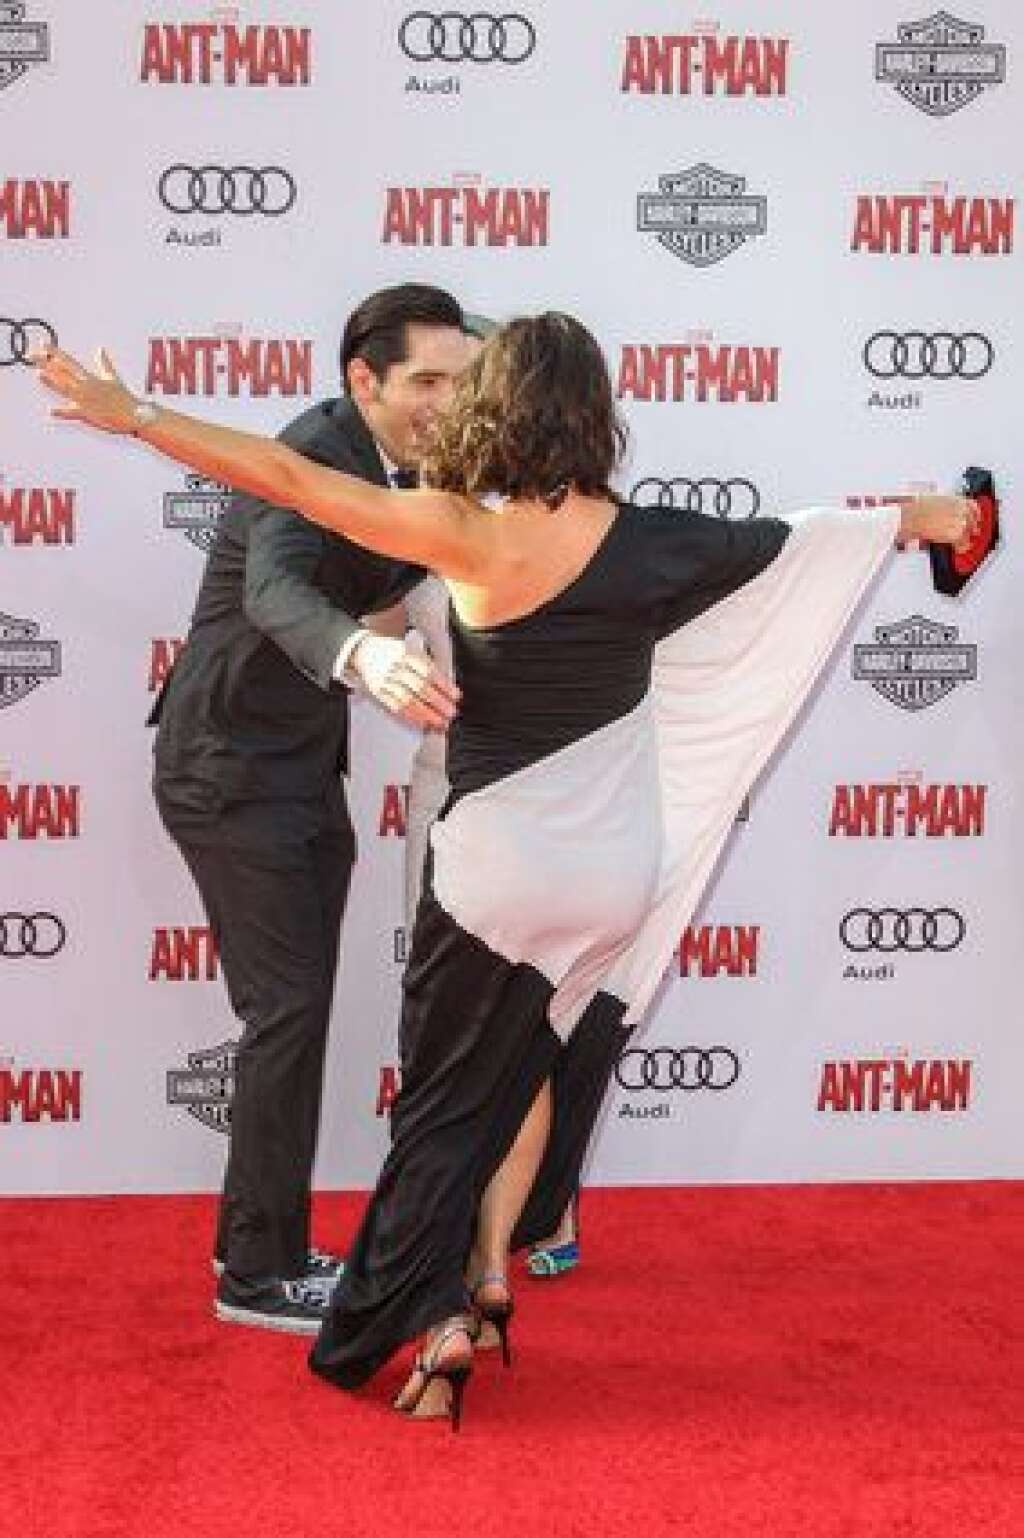 World Premiere of "Ant-Man" - Evangeline Lilly runs to greet David Dastmalchian at the world premiere of Marvel's 'Ant-Man' at the Dolby Theatre on Monday, June 29, 2015 in Los Angeles. (Photo by Paul A. Hebert/Invision/AP)